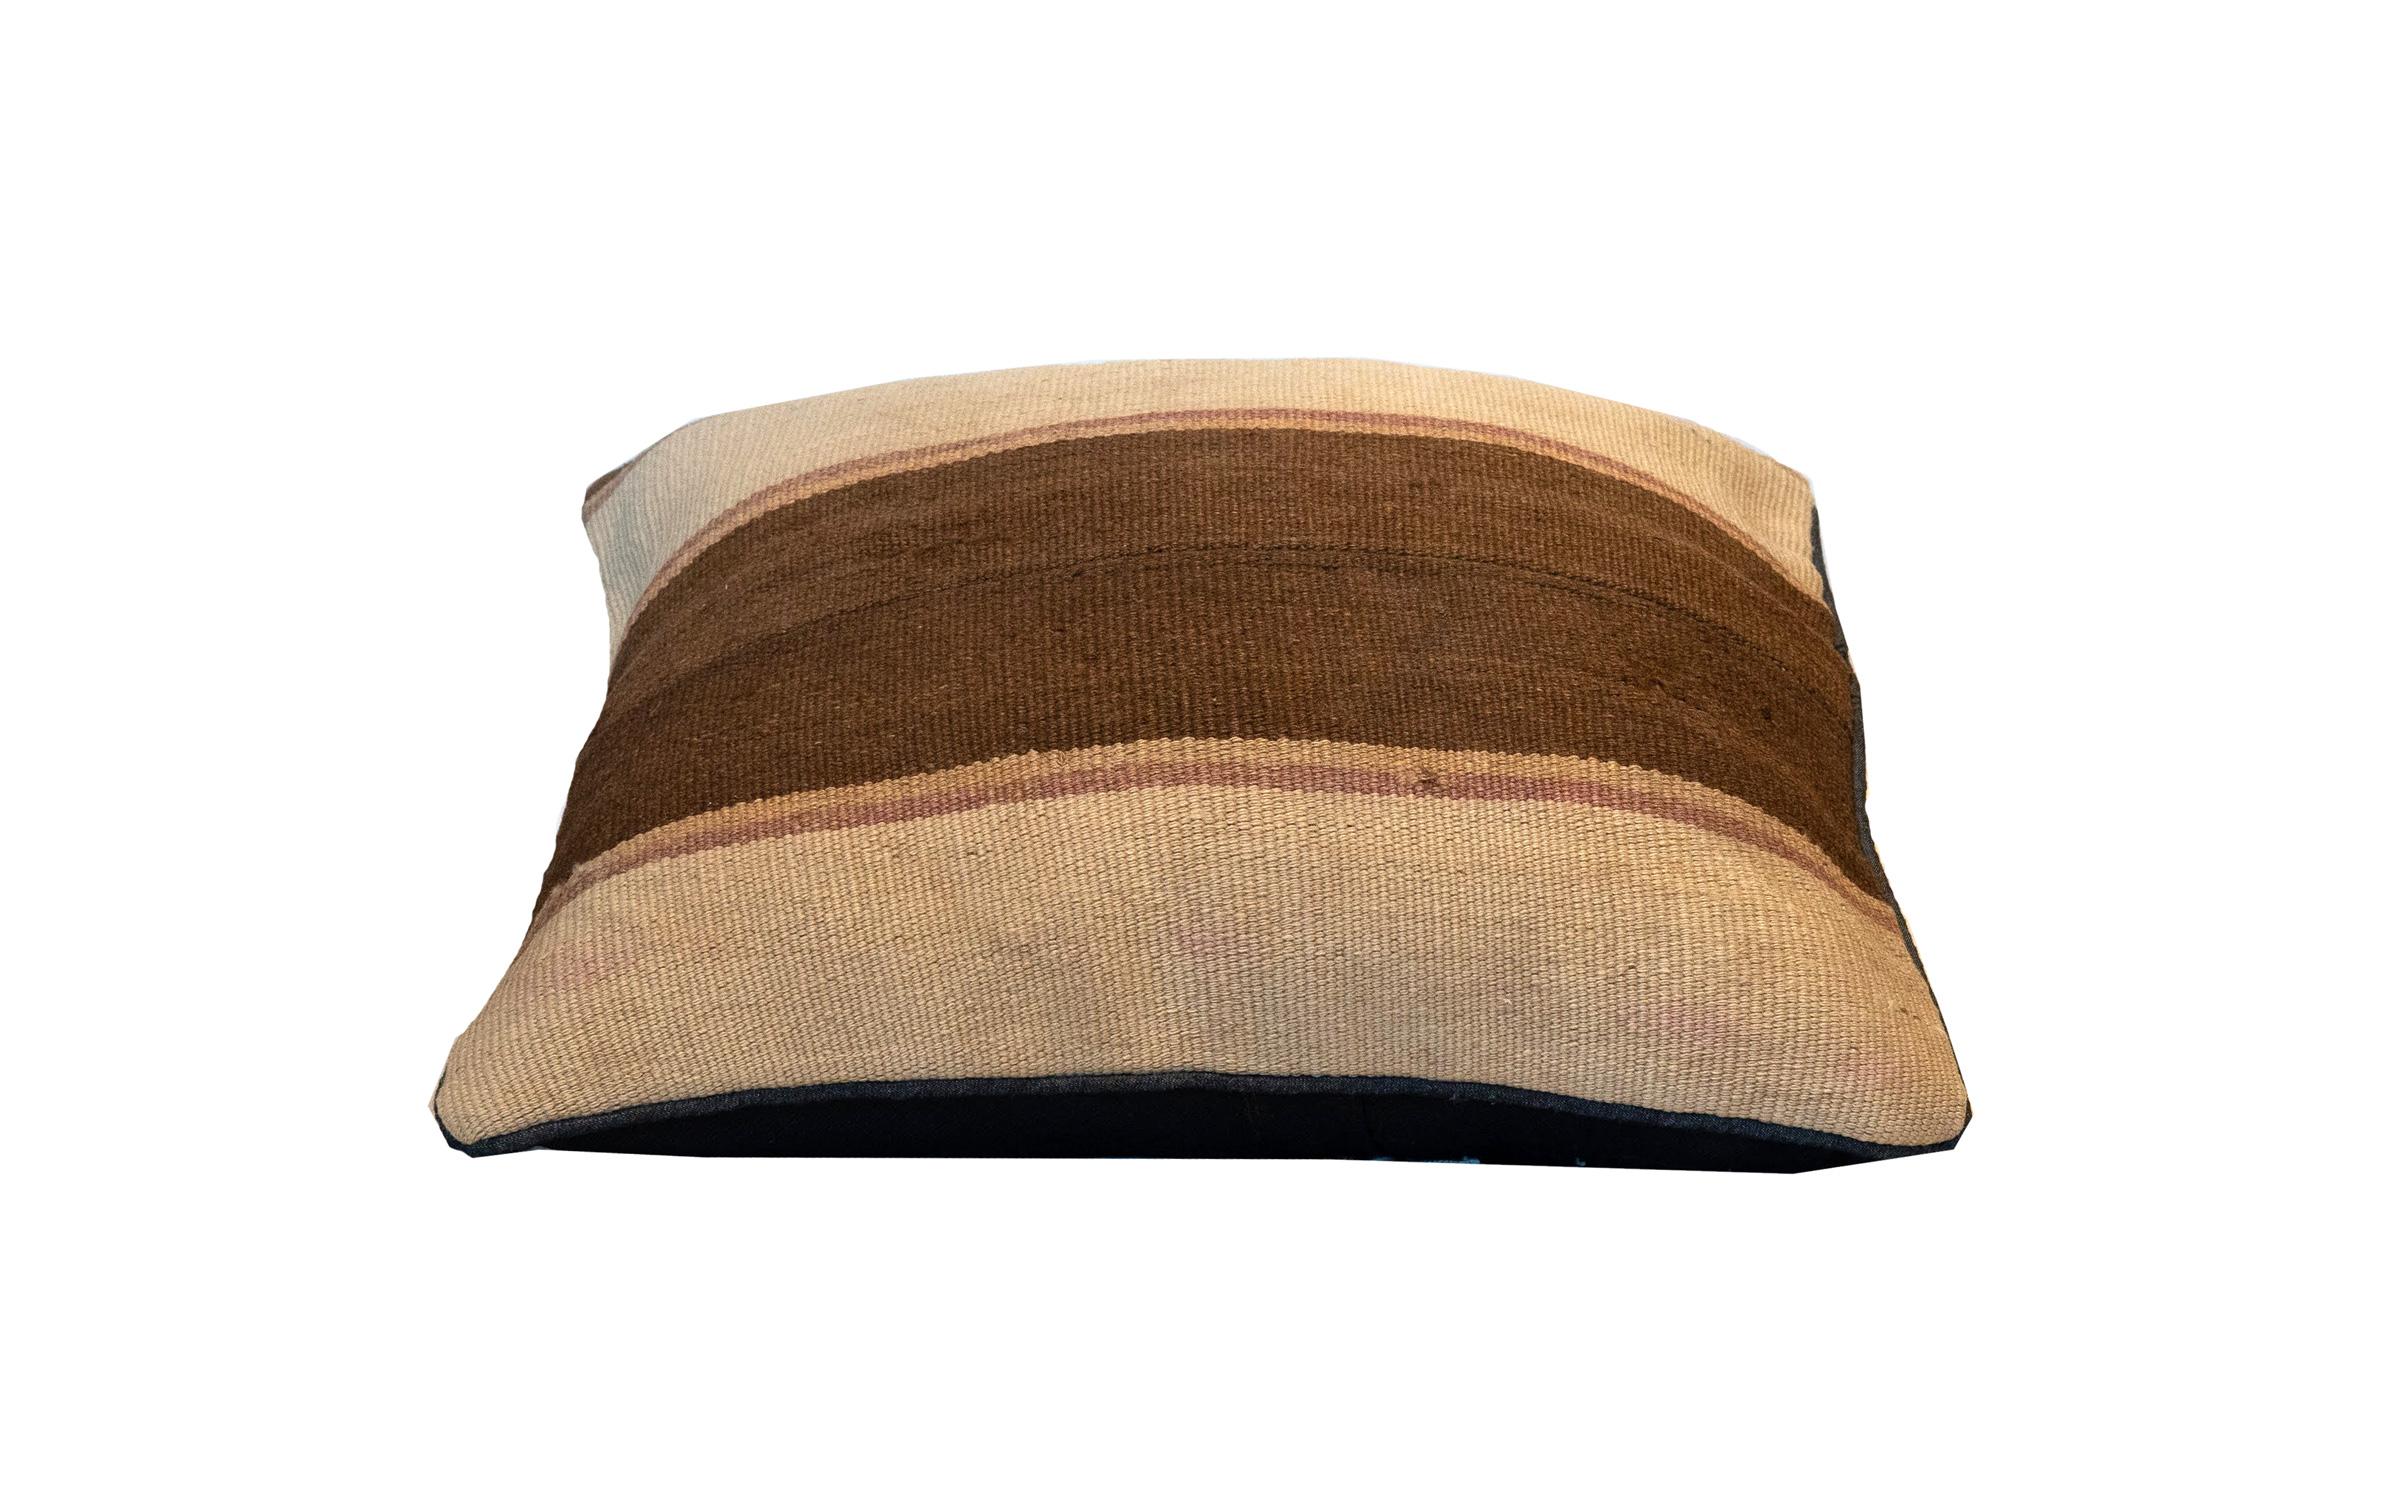 This simple stripe cushion has been woven by hand using traditional kilim weaving techniques with hand-spun wool. Featuring a simple stripe design, with thick cream and brown lines, with smaller beige and subtle pink lines. With some small signs of